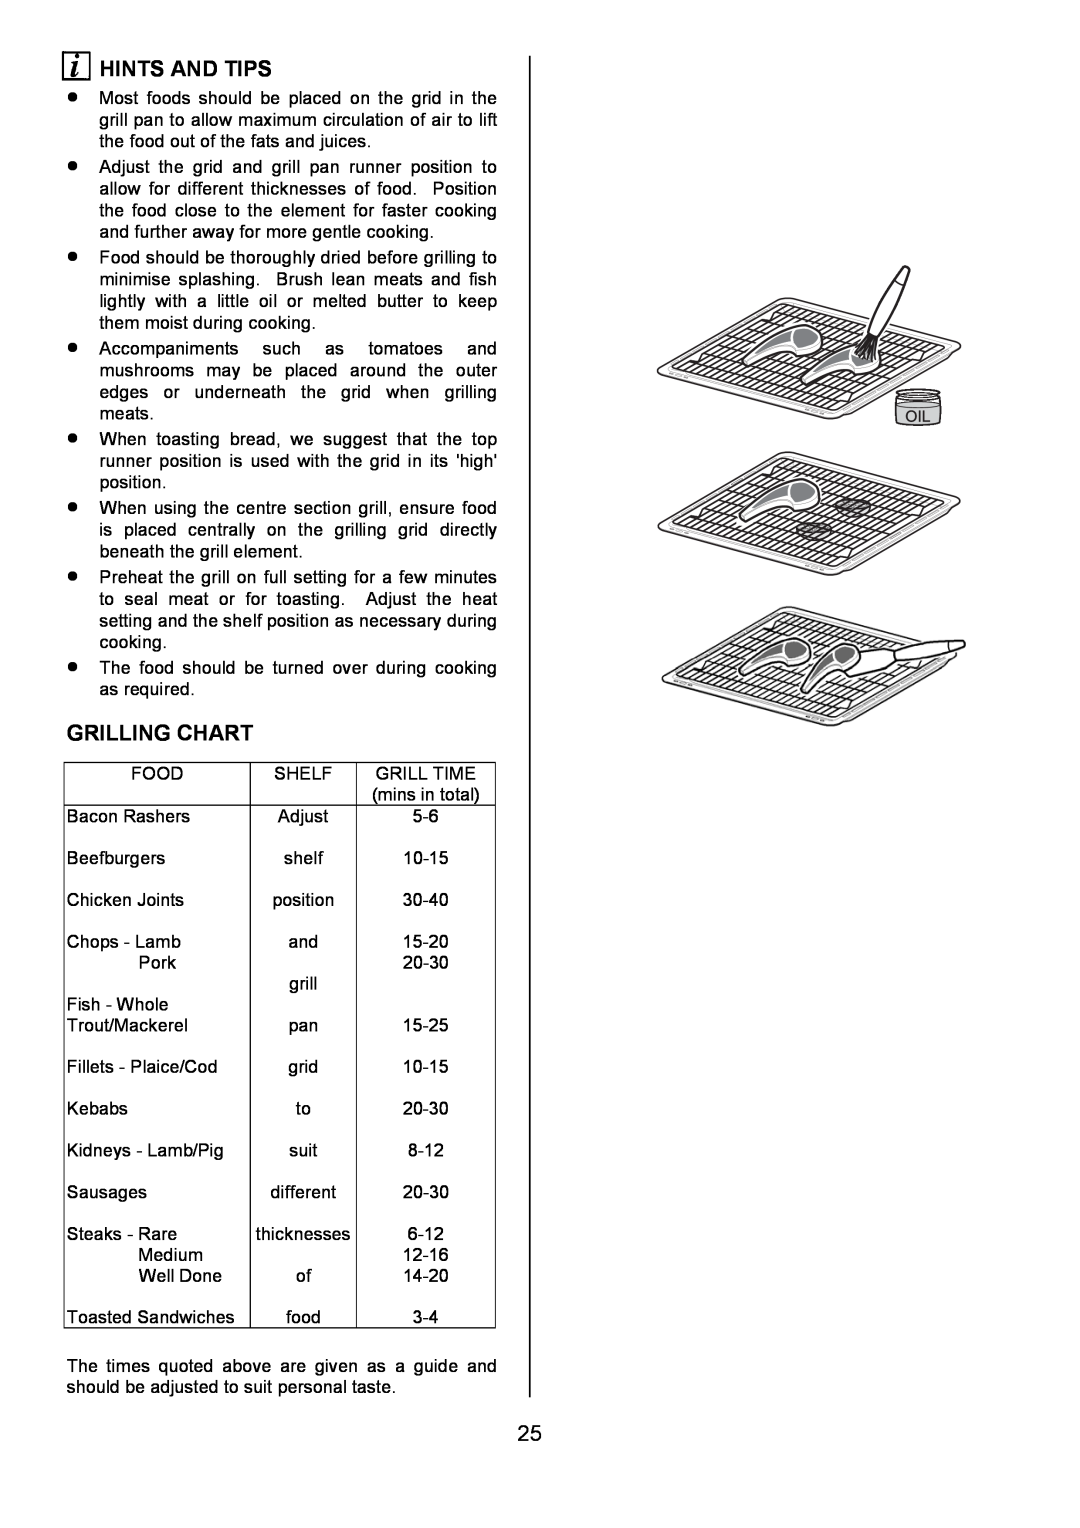 Electrolux D4101-4 operating instructions Hints And Tips, Grilling Chart, Food 